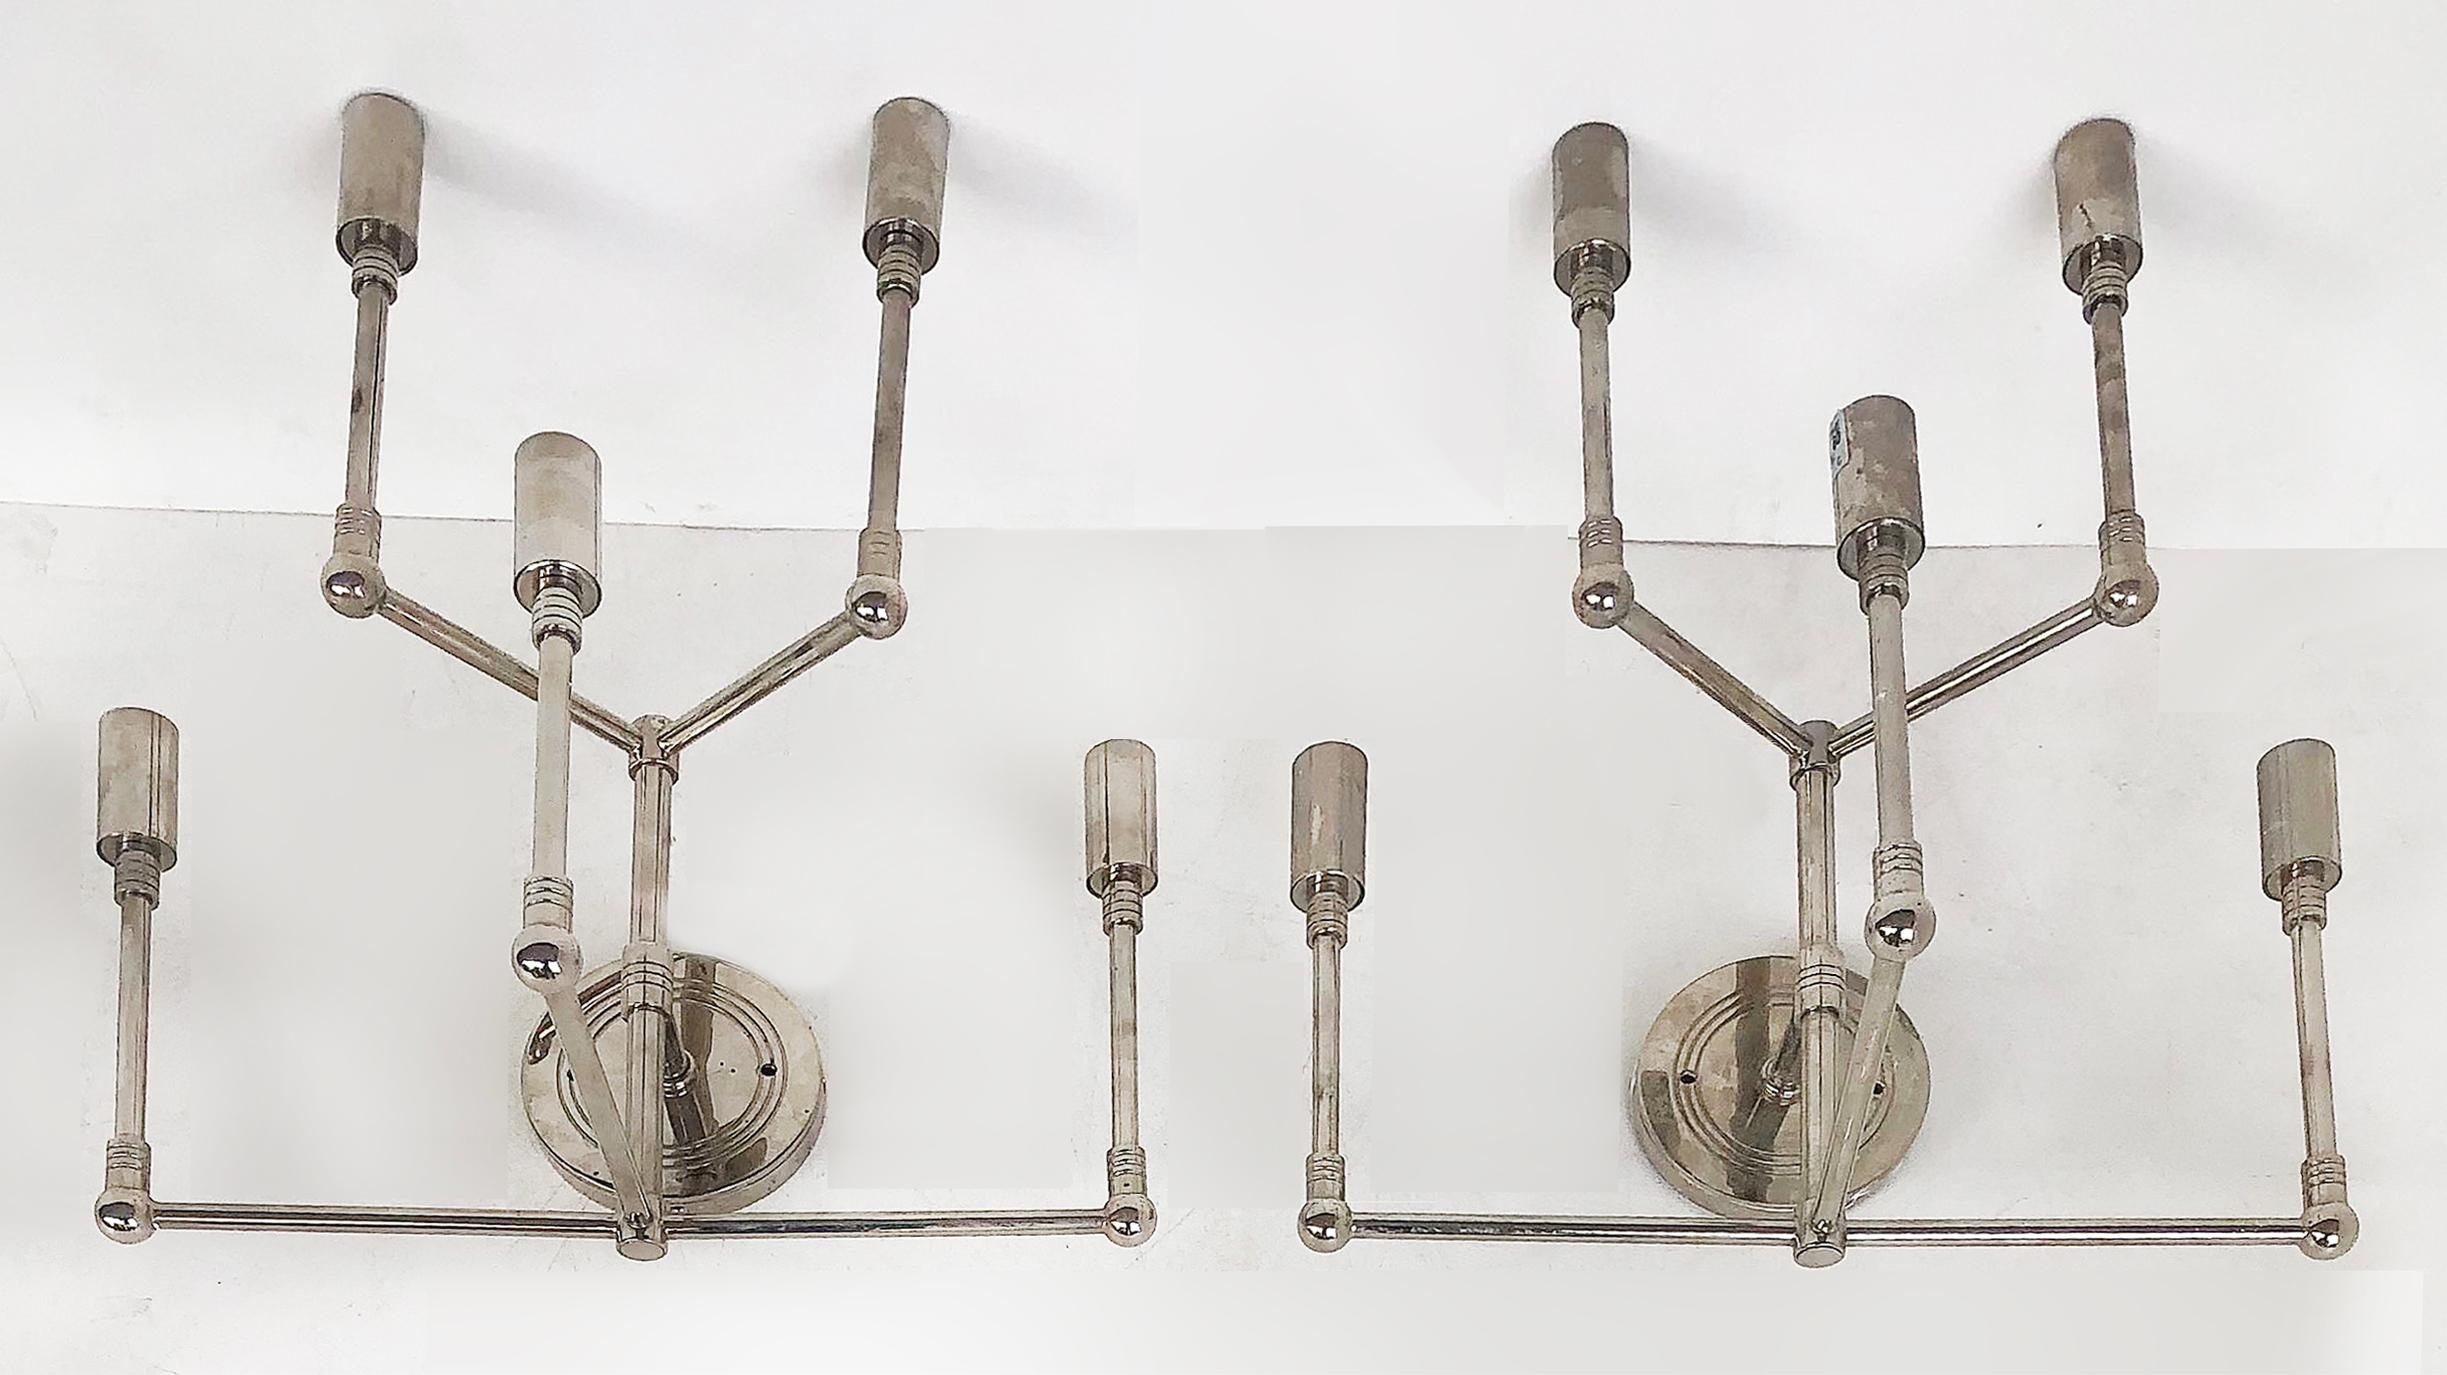 Fine quality mid-century stainless steel wall sconces, pair

Offered for sale is a pair of Mid-Century Modern fine quality stainless steel five-light wall sconces. Each is wired and ready to hang. The Sconces accommodate chandelier bulbs.
     